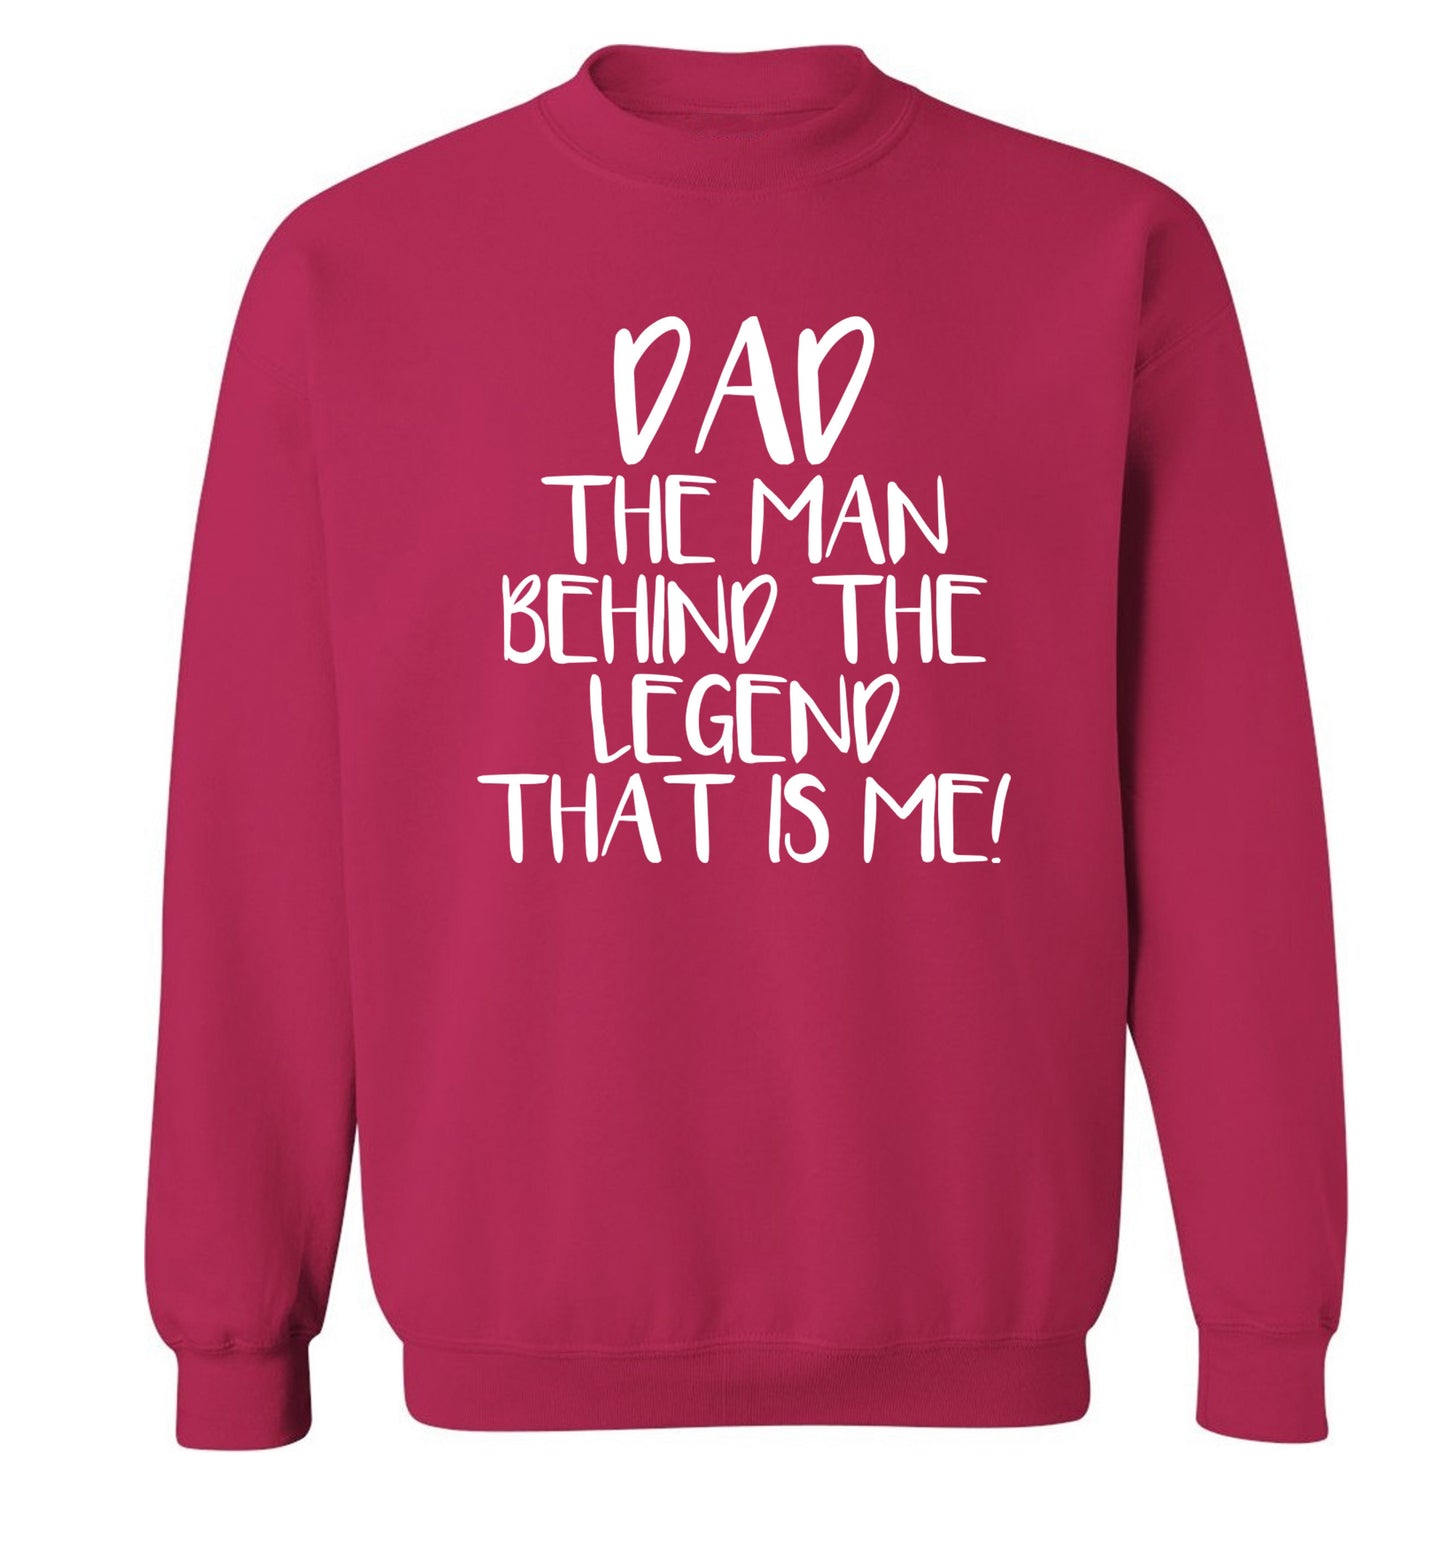 Dad the man behind the legend that is me! Adult's unisex pink Sweater 2XL